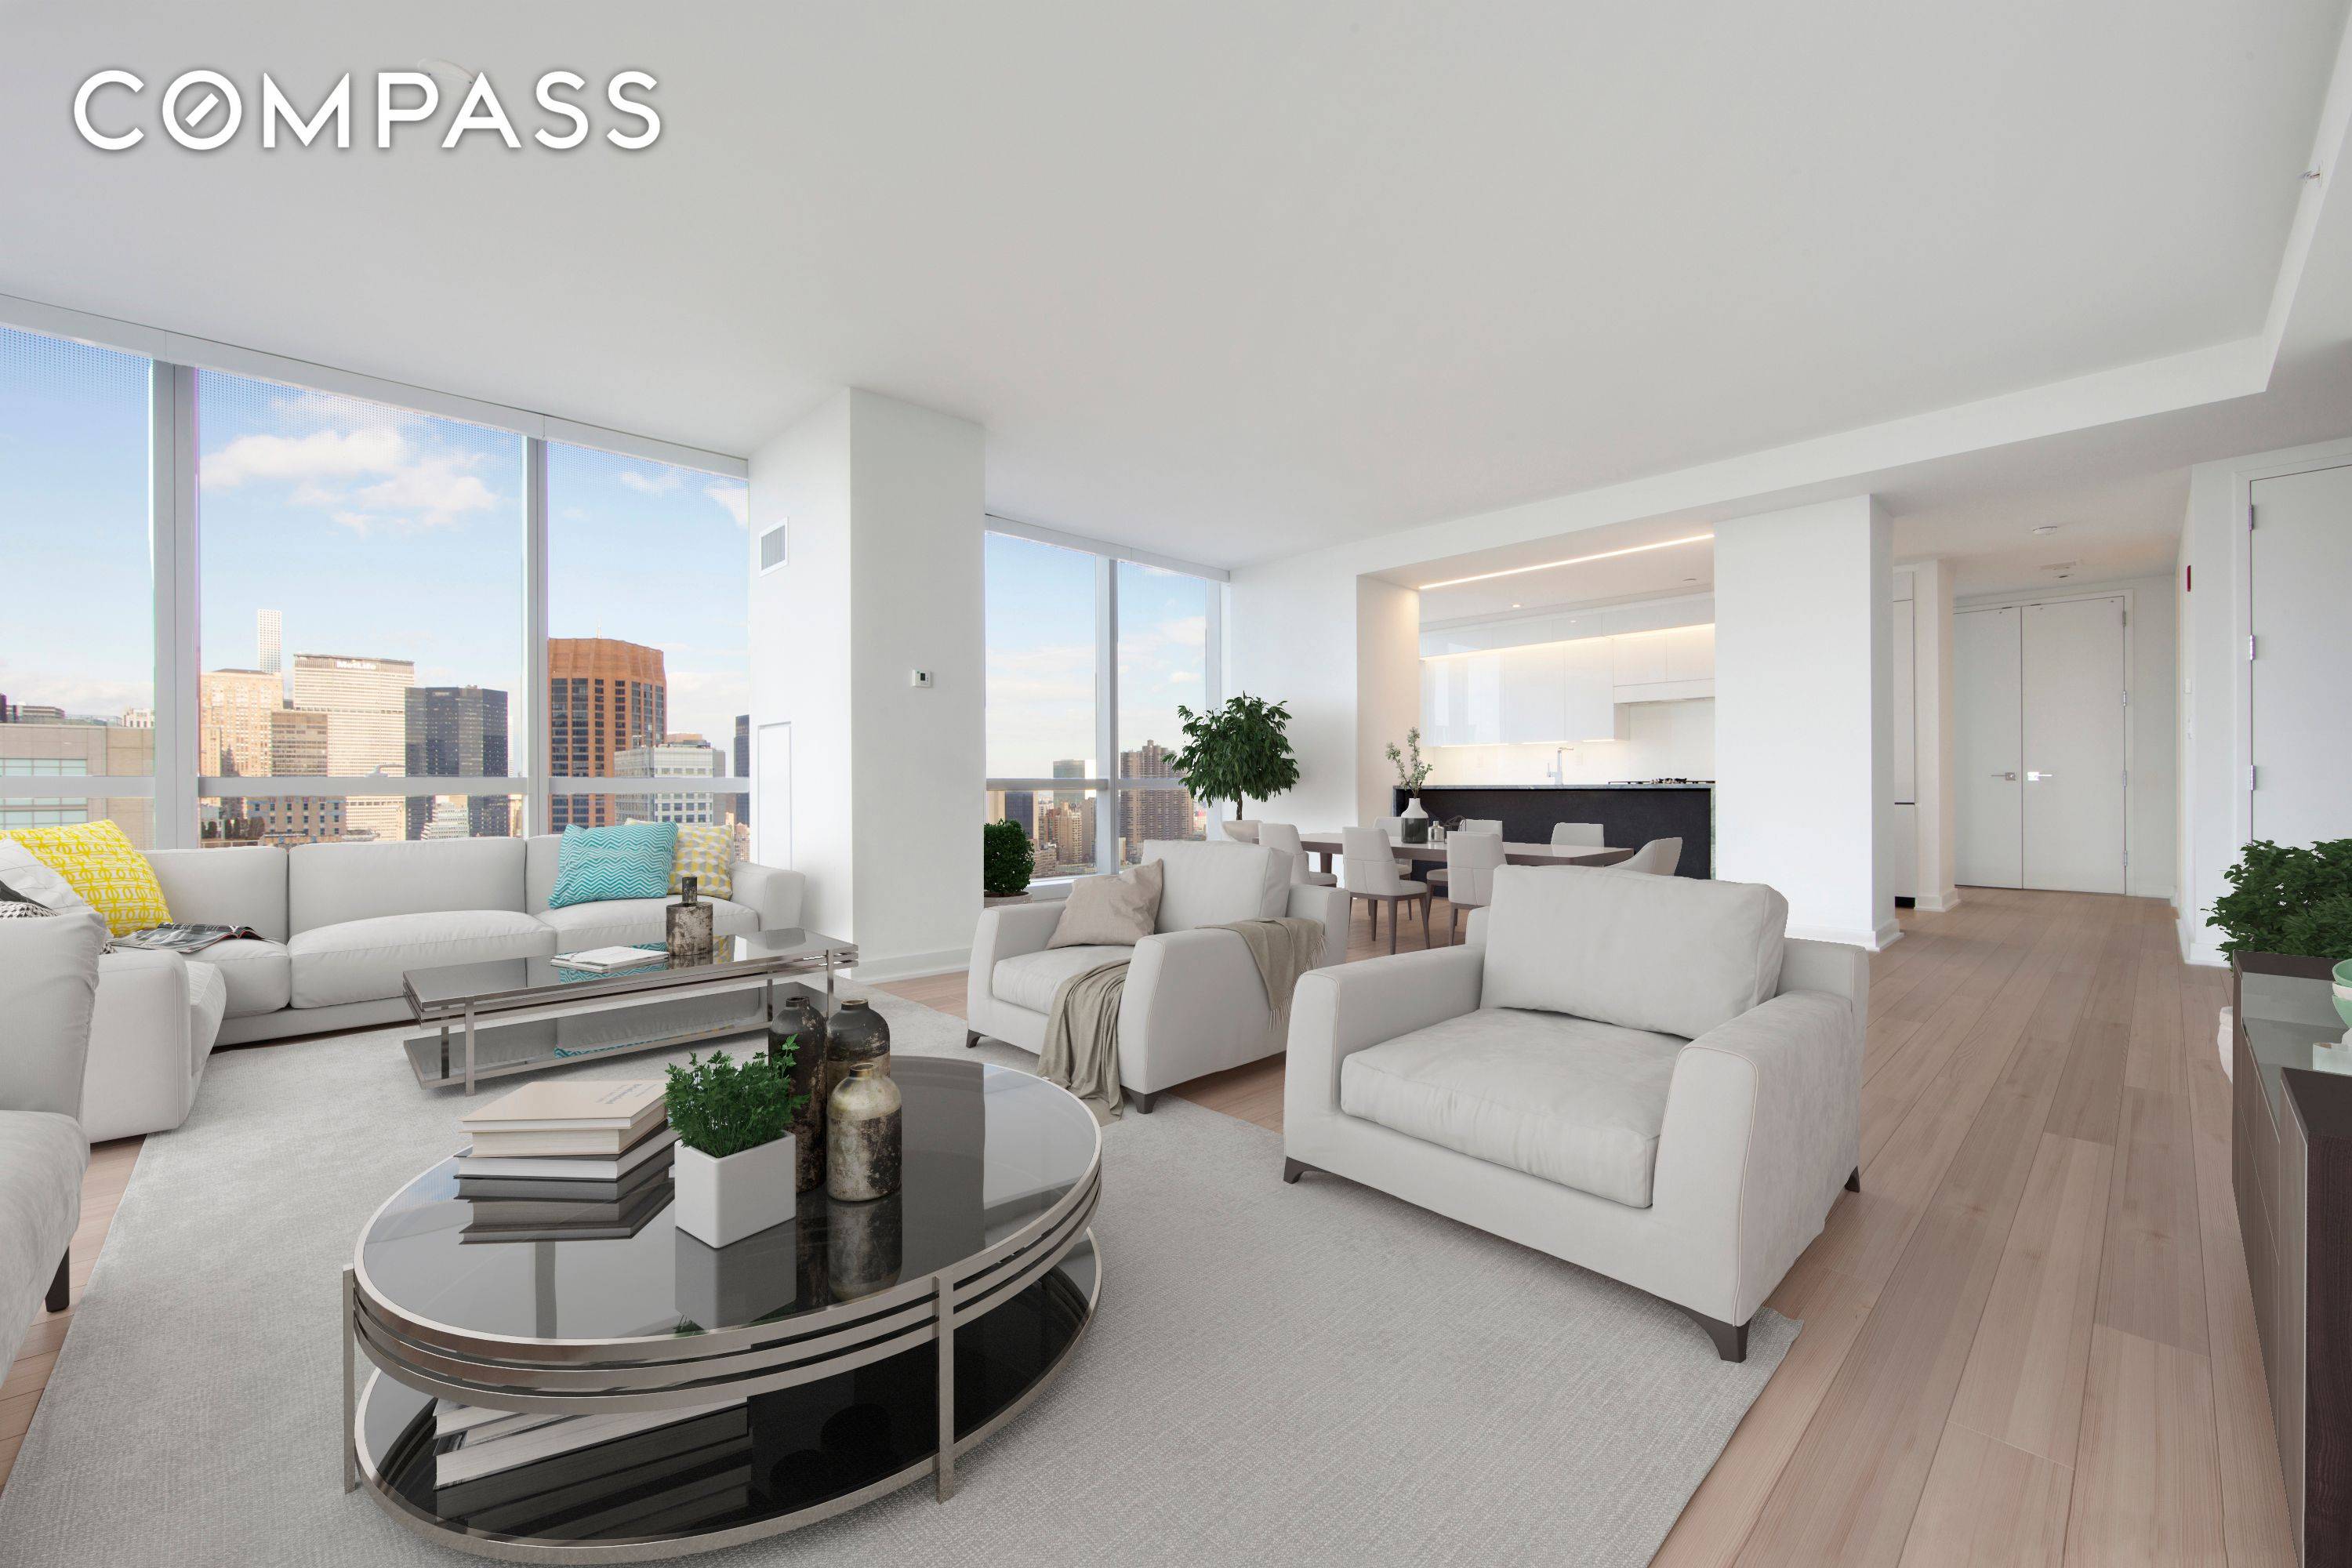 Residence 36C feature white oak floors, open living spaces, and floor to ceiling windows that maximize the stunning city views.